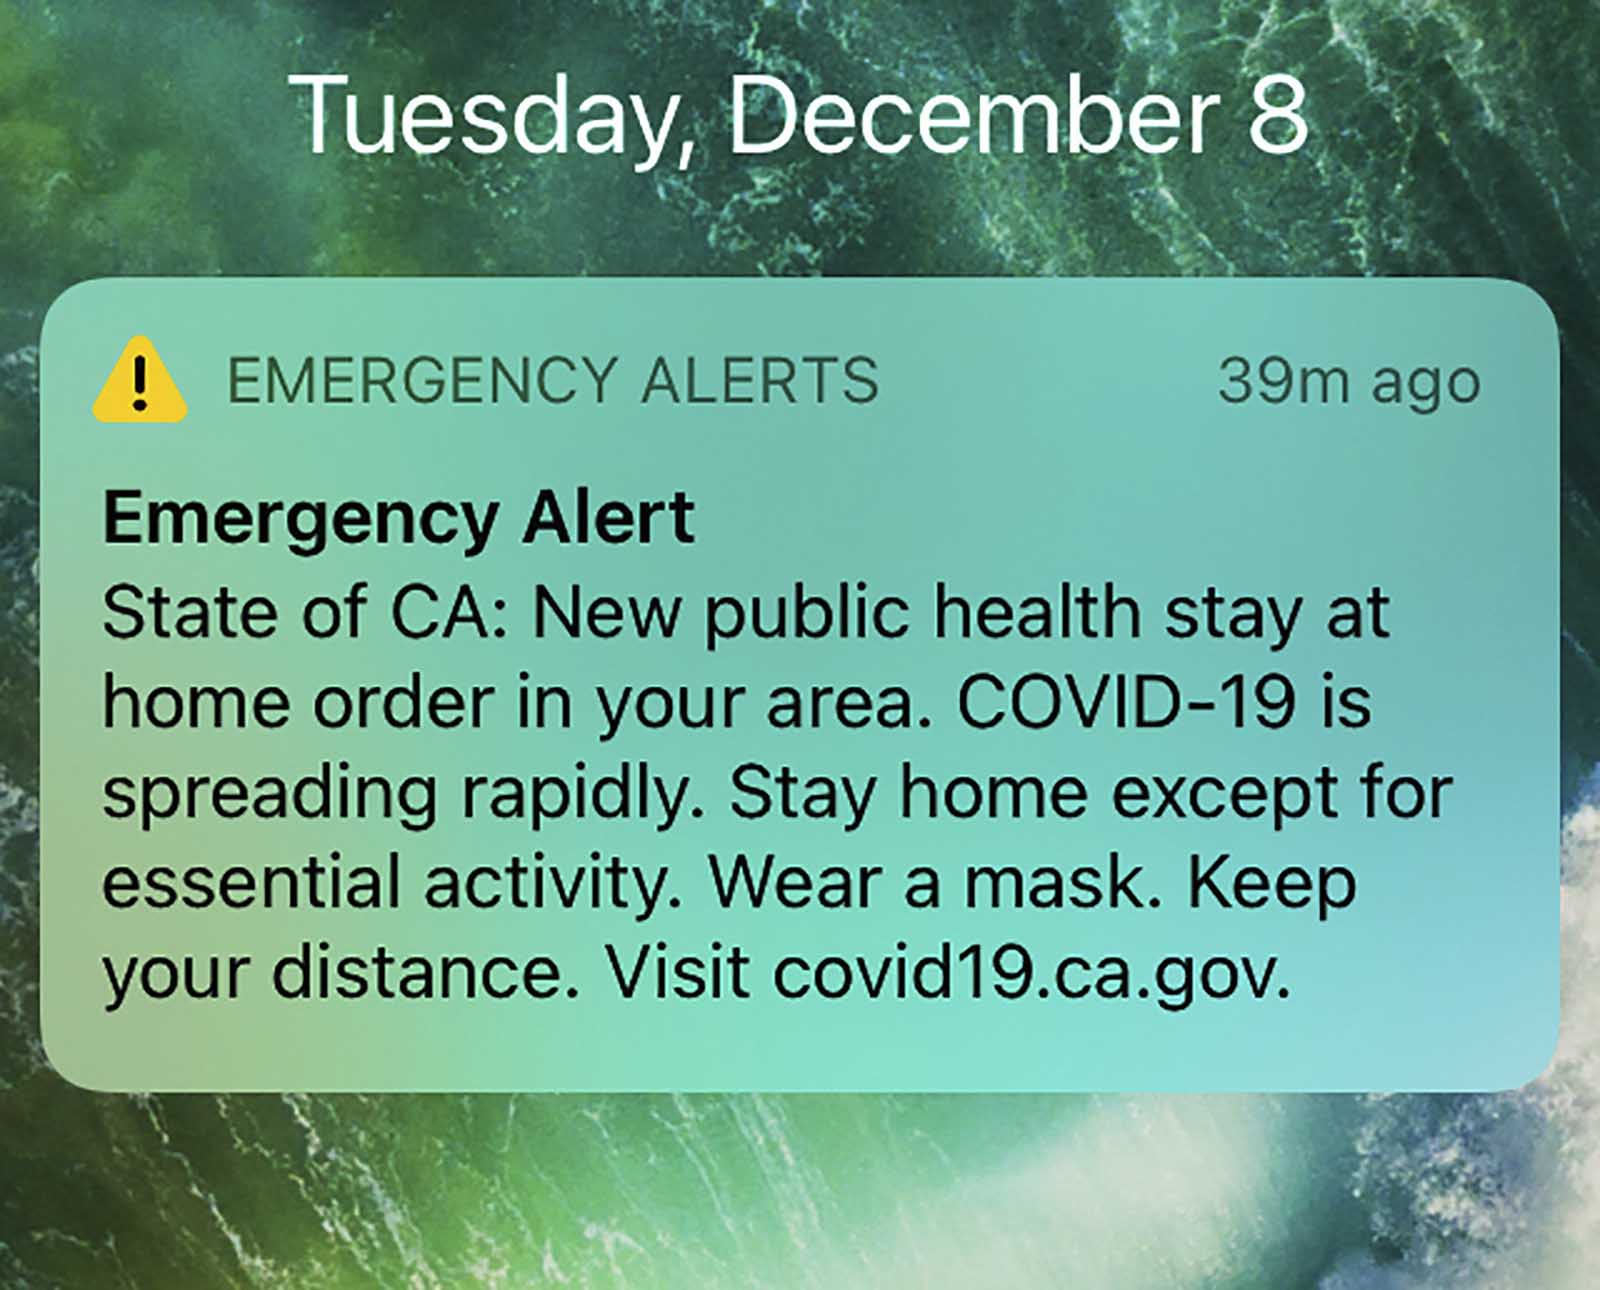 California authorities sent this cell phone text alert to two major regions of the state on Tuesday, December 8, to notify people that the coronavirus is spreading rapidly and advise them to stay home except for essential activities.